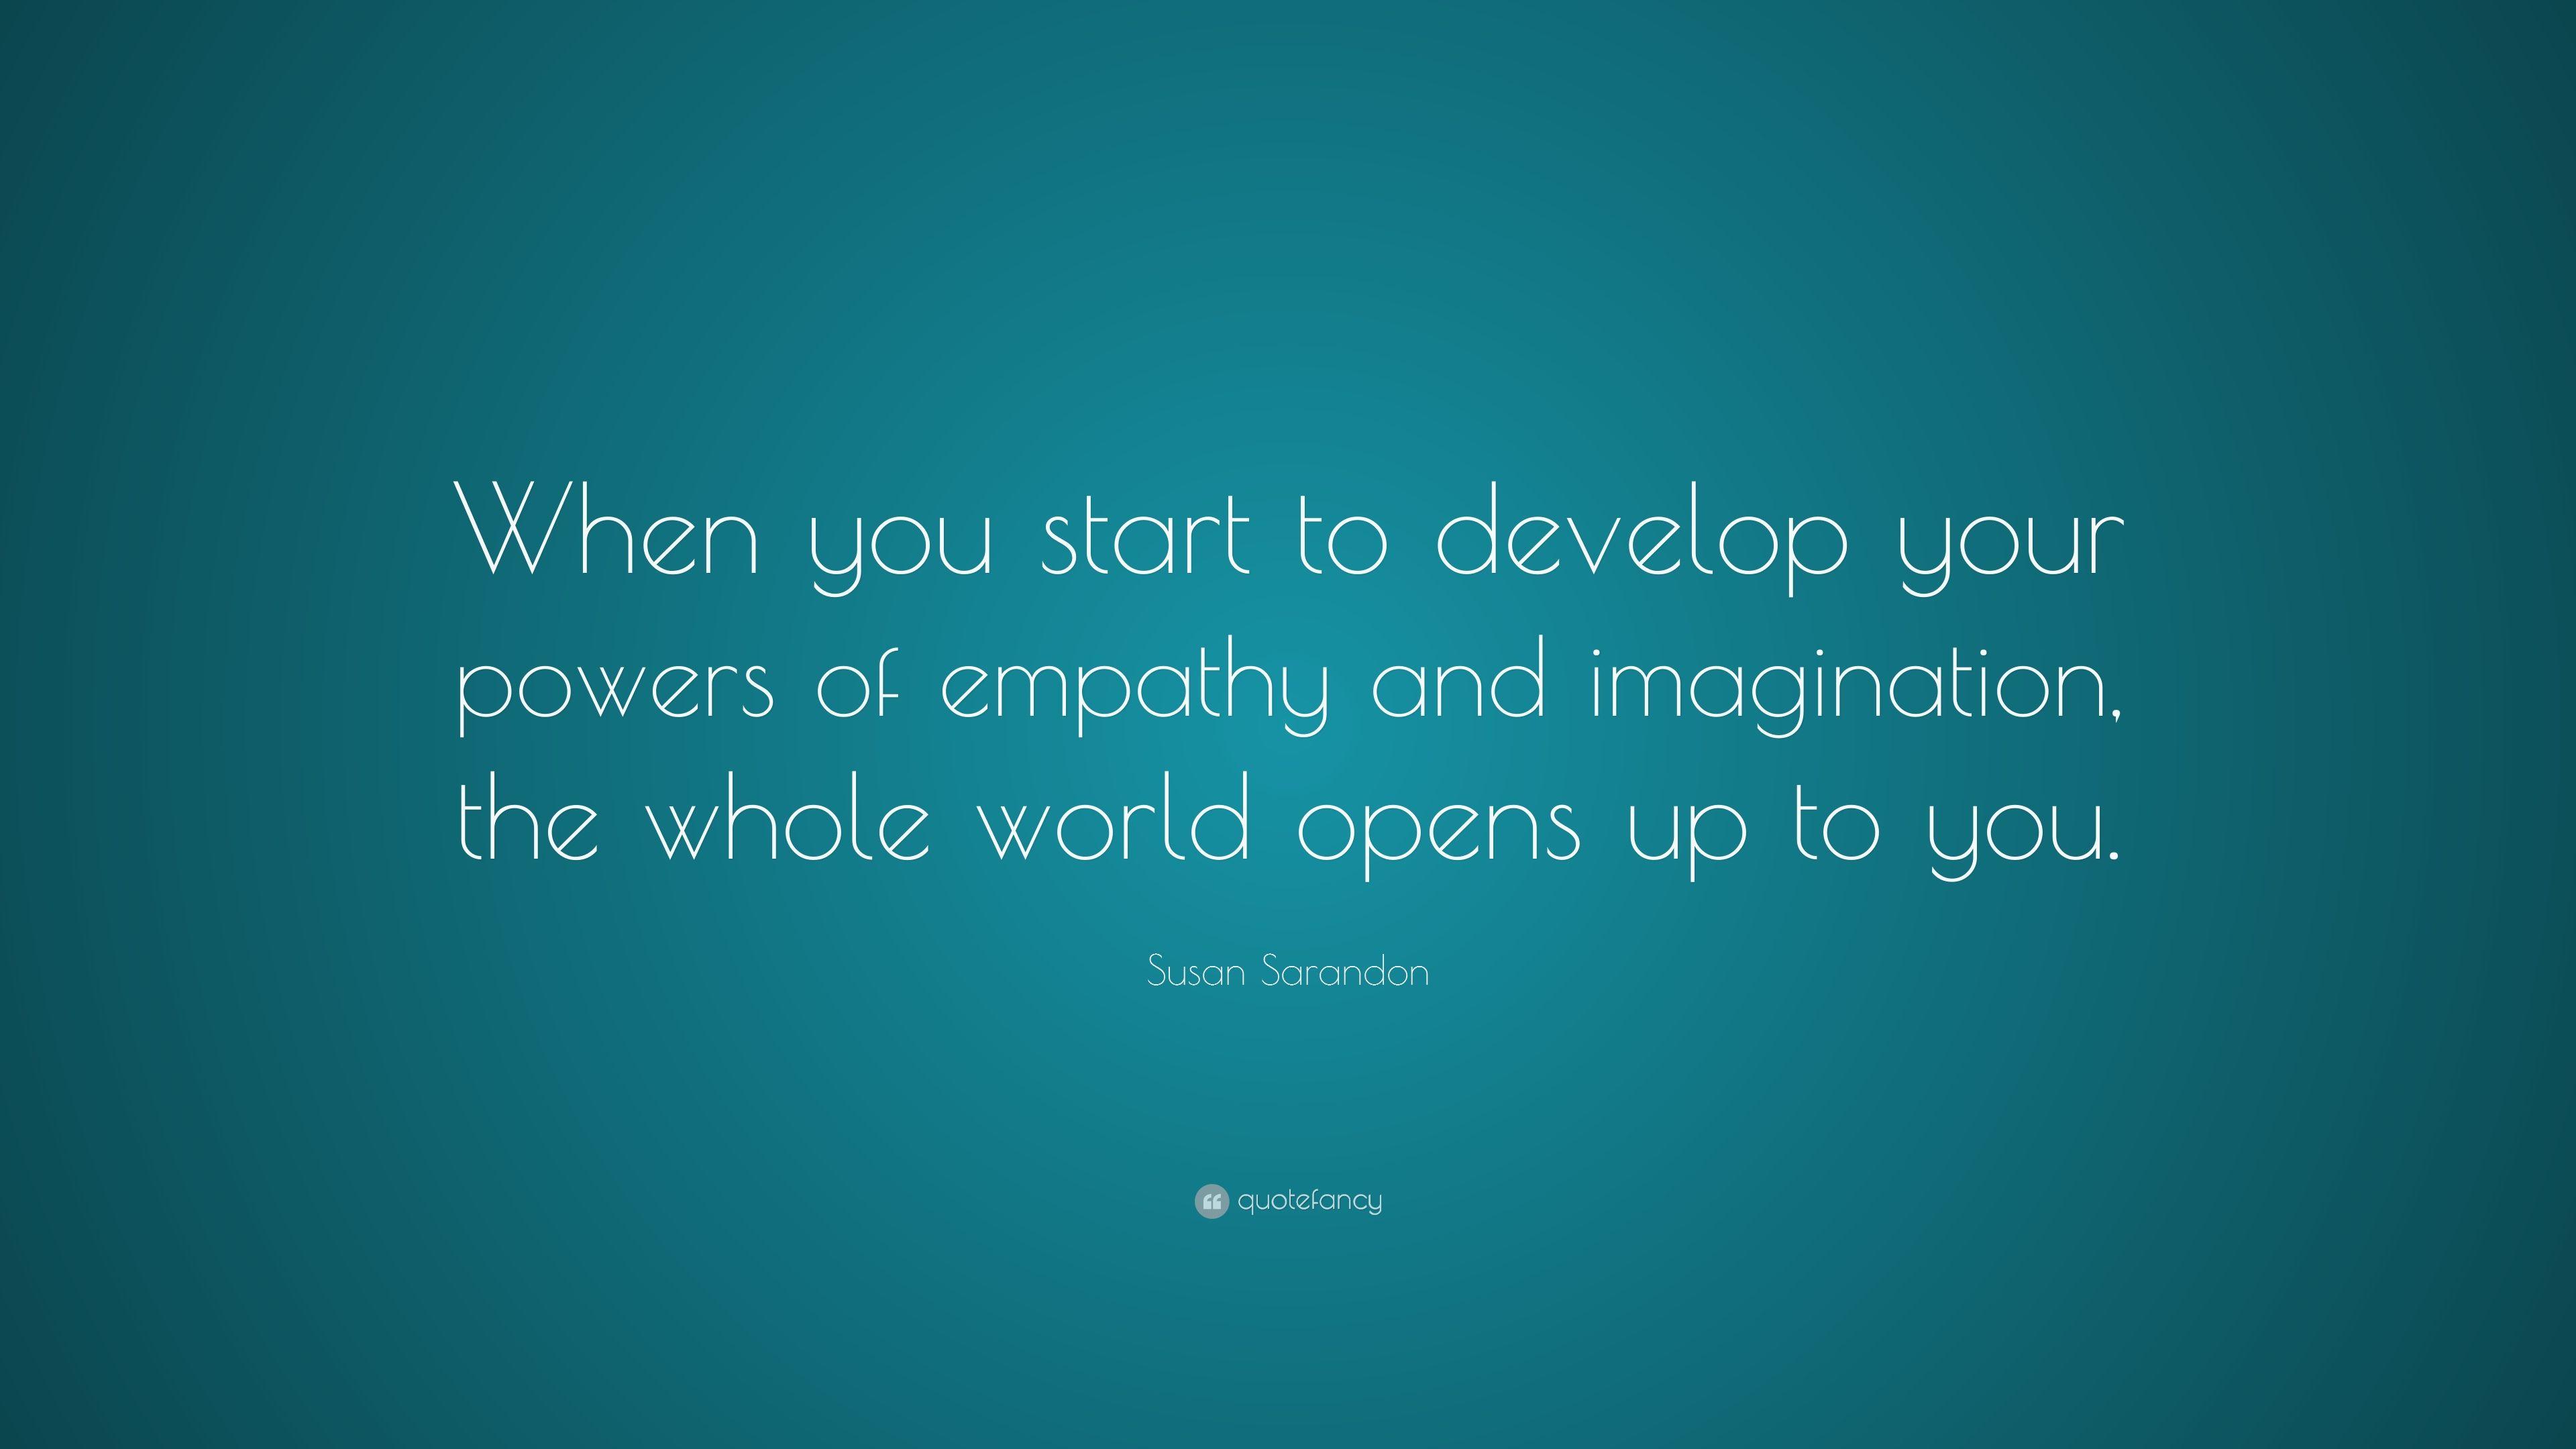 Susan Sarandon Quote: “When you start to develop your powers